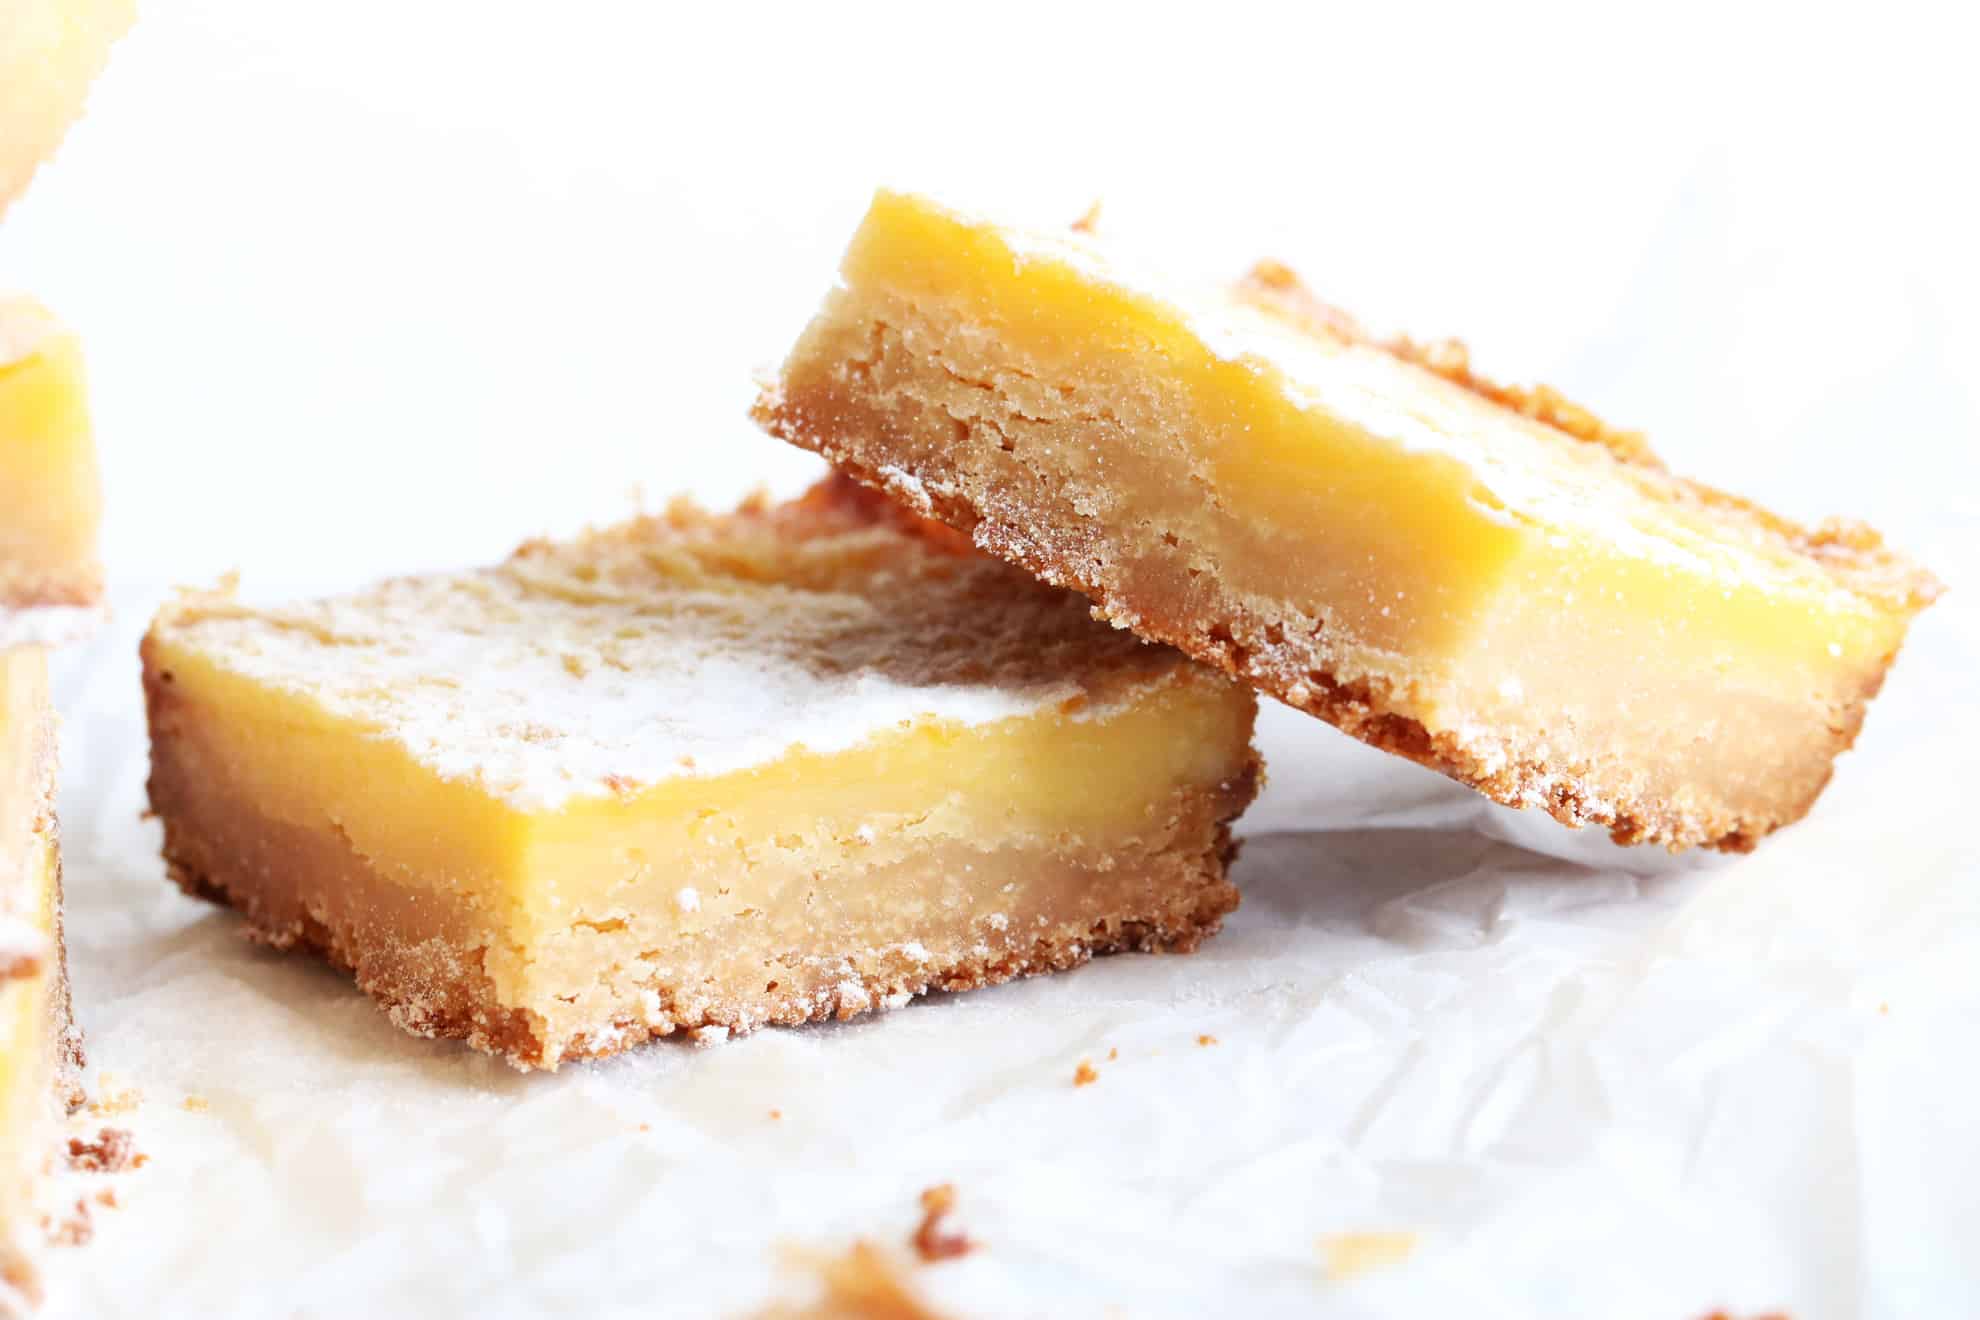 This is a side view of a lemon bar leaning against another lemon bar. The bars sit on a white piece of parchment paper with a white background. 